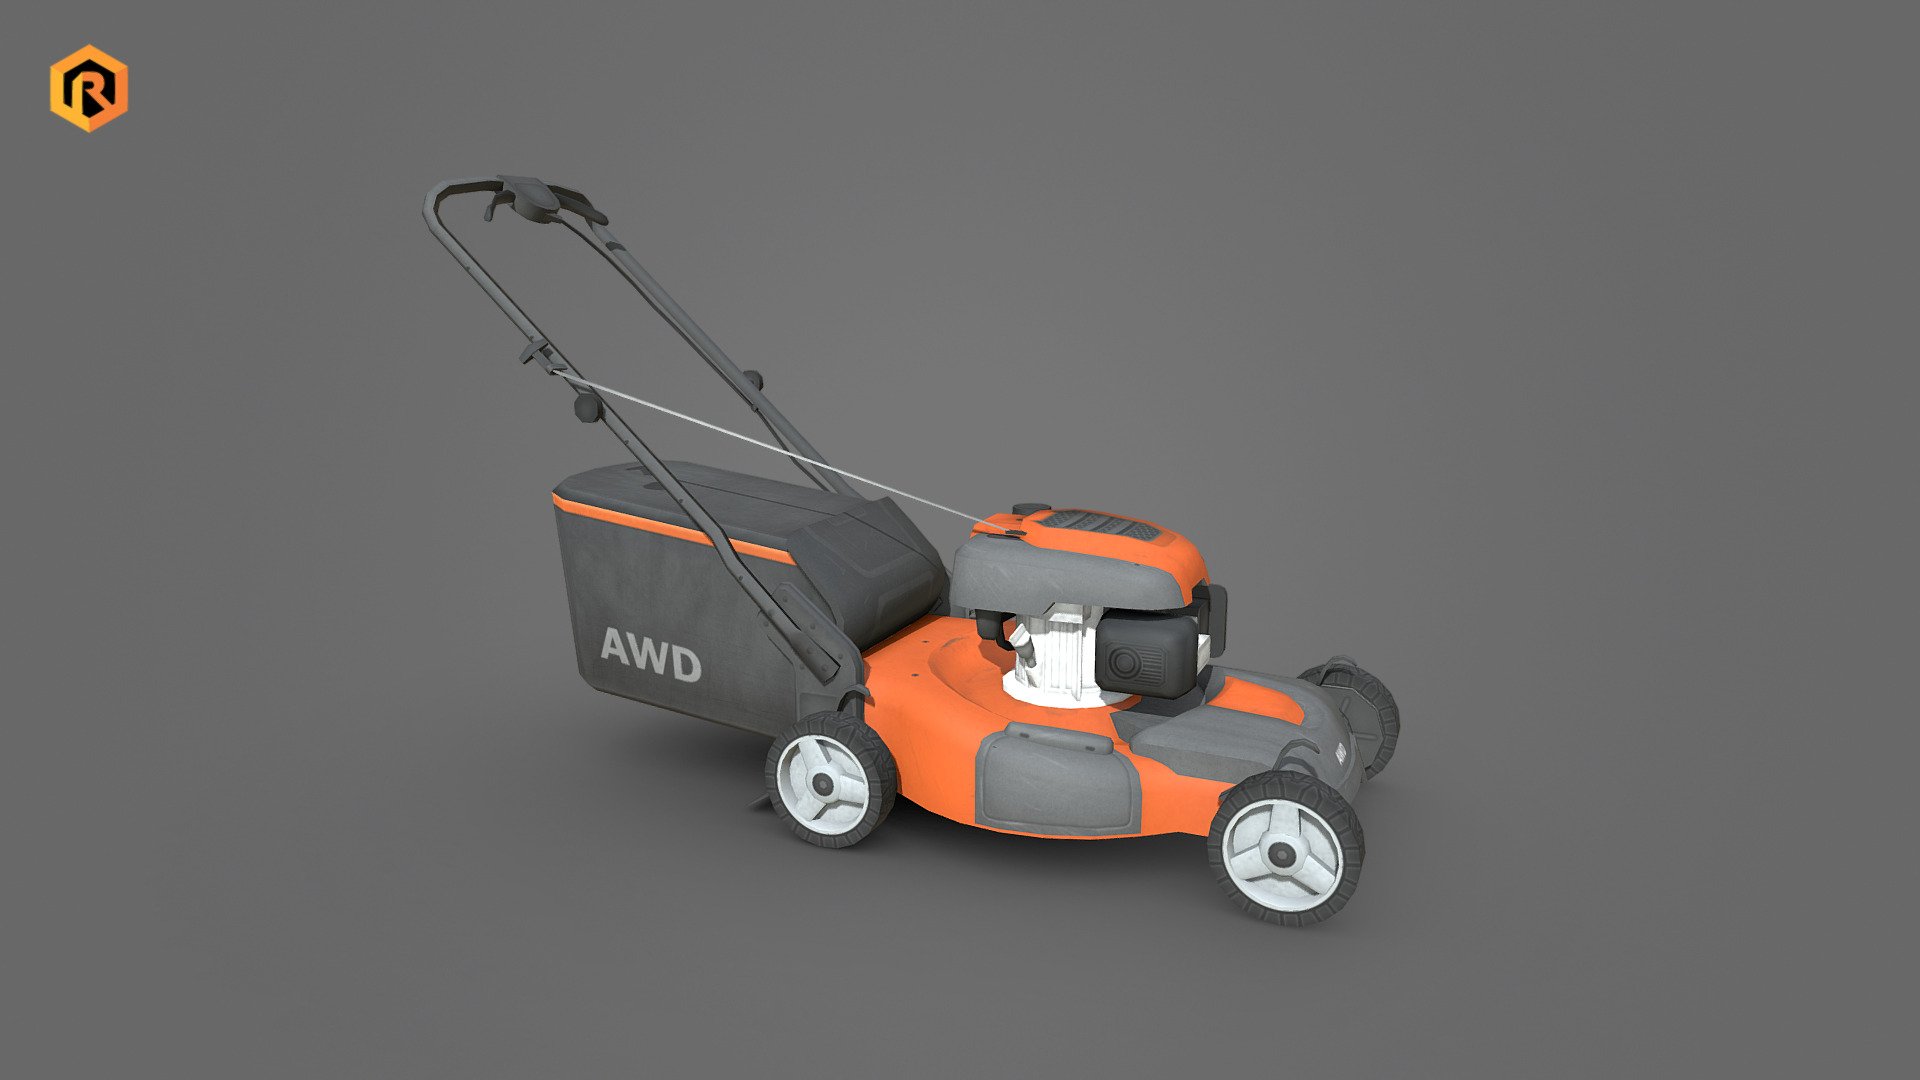 Low-poly 3D model of Lawn Mower.

It is best for use in games and other VR / AR, real-time applications such as Unity or Unreal Engine.

It can also be rendered in Blender (ex Cycles) or Vray as the model is equipped with all required PBR textures.  

**You can also get this model in these bundles: ** 

https://skfb.ly/otro7 

https://skfb.ly/osCqC 

https://skfb.ly/osRTL    

Model Info:




2048 x 2048 Diffuse and AO textures

4639 Triangles

2782 Vertices

Model is correctly divided into parts to suit animation process.

Pivot points are correctly placed to suit animation process.

All nodes, materials and textures are appropriately named.

More file formats are available in additional zip file on product page.

Please feel free to contact me if you have any questions or need any support for this asset.

Support e-mail: support@rescue3d.com - Lawn Mower - Buy Royalty Free 3D model by Rescue3D Assets (@rescue3d) 3d model